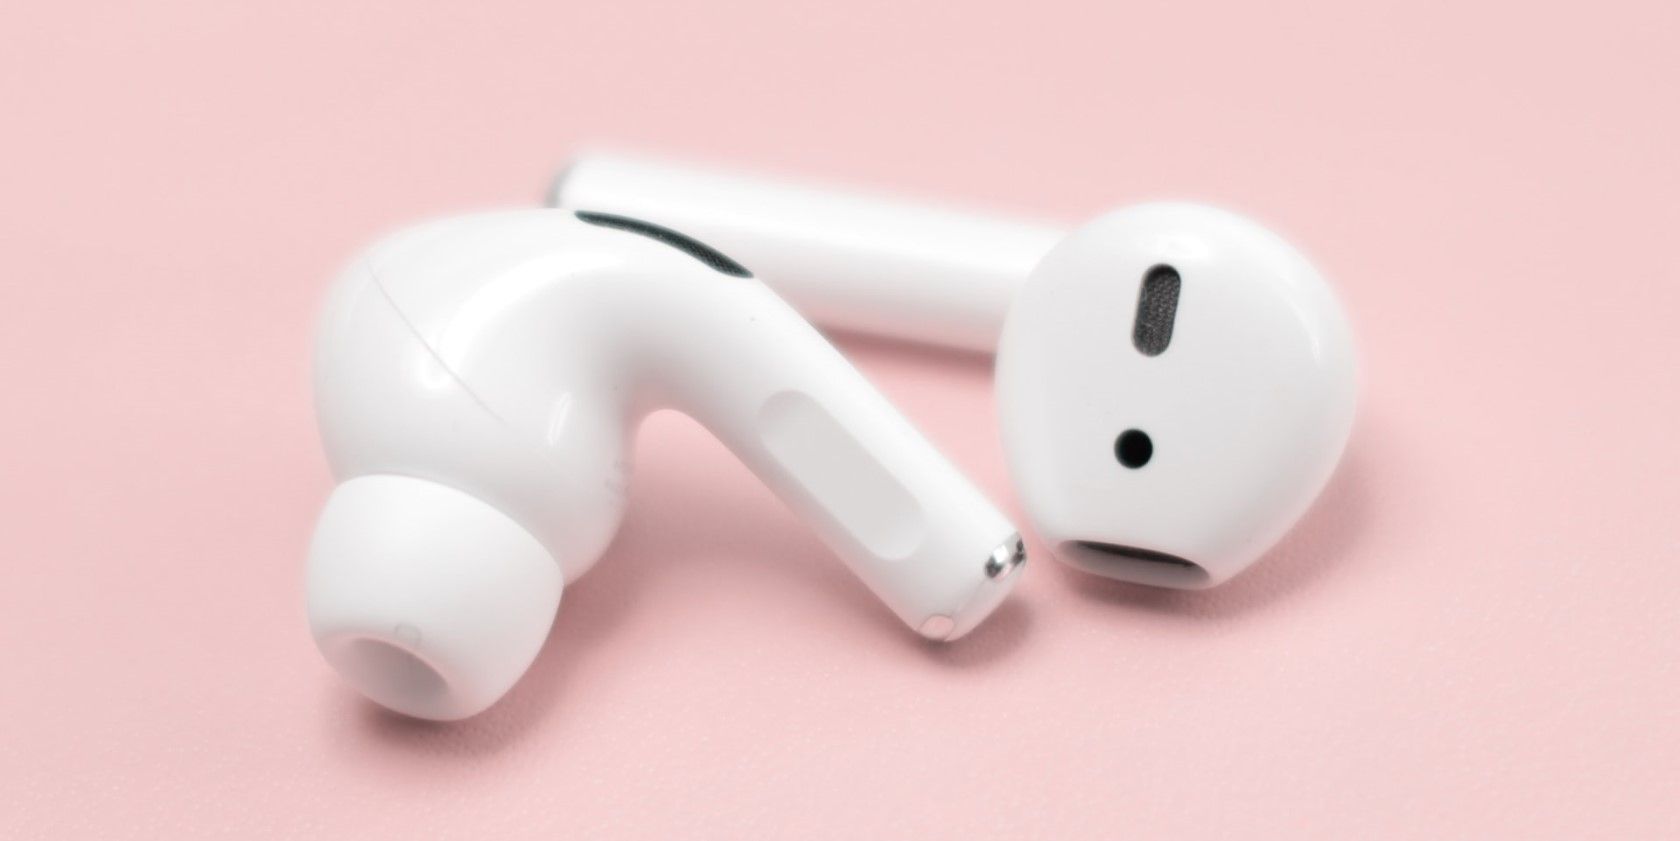 The 5 Best Fake AirPods That Look Like the Real Deal